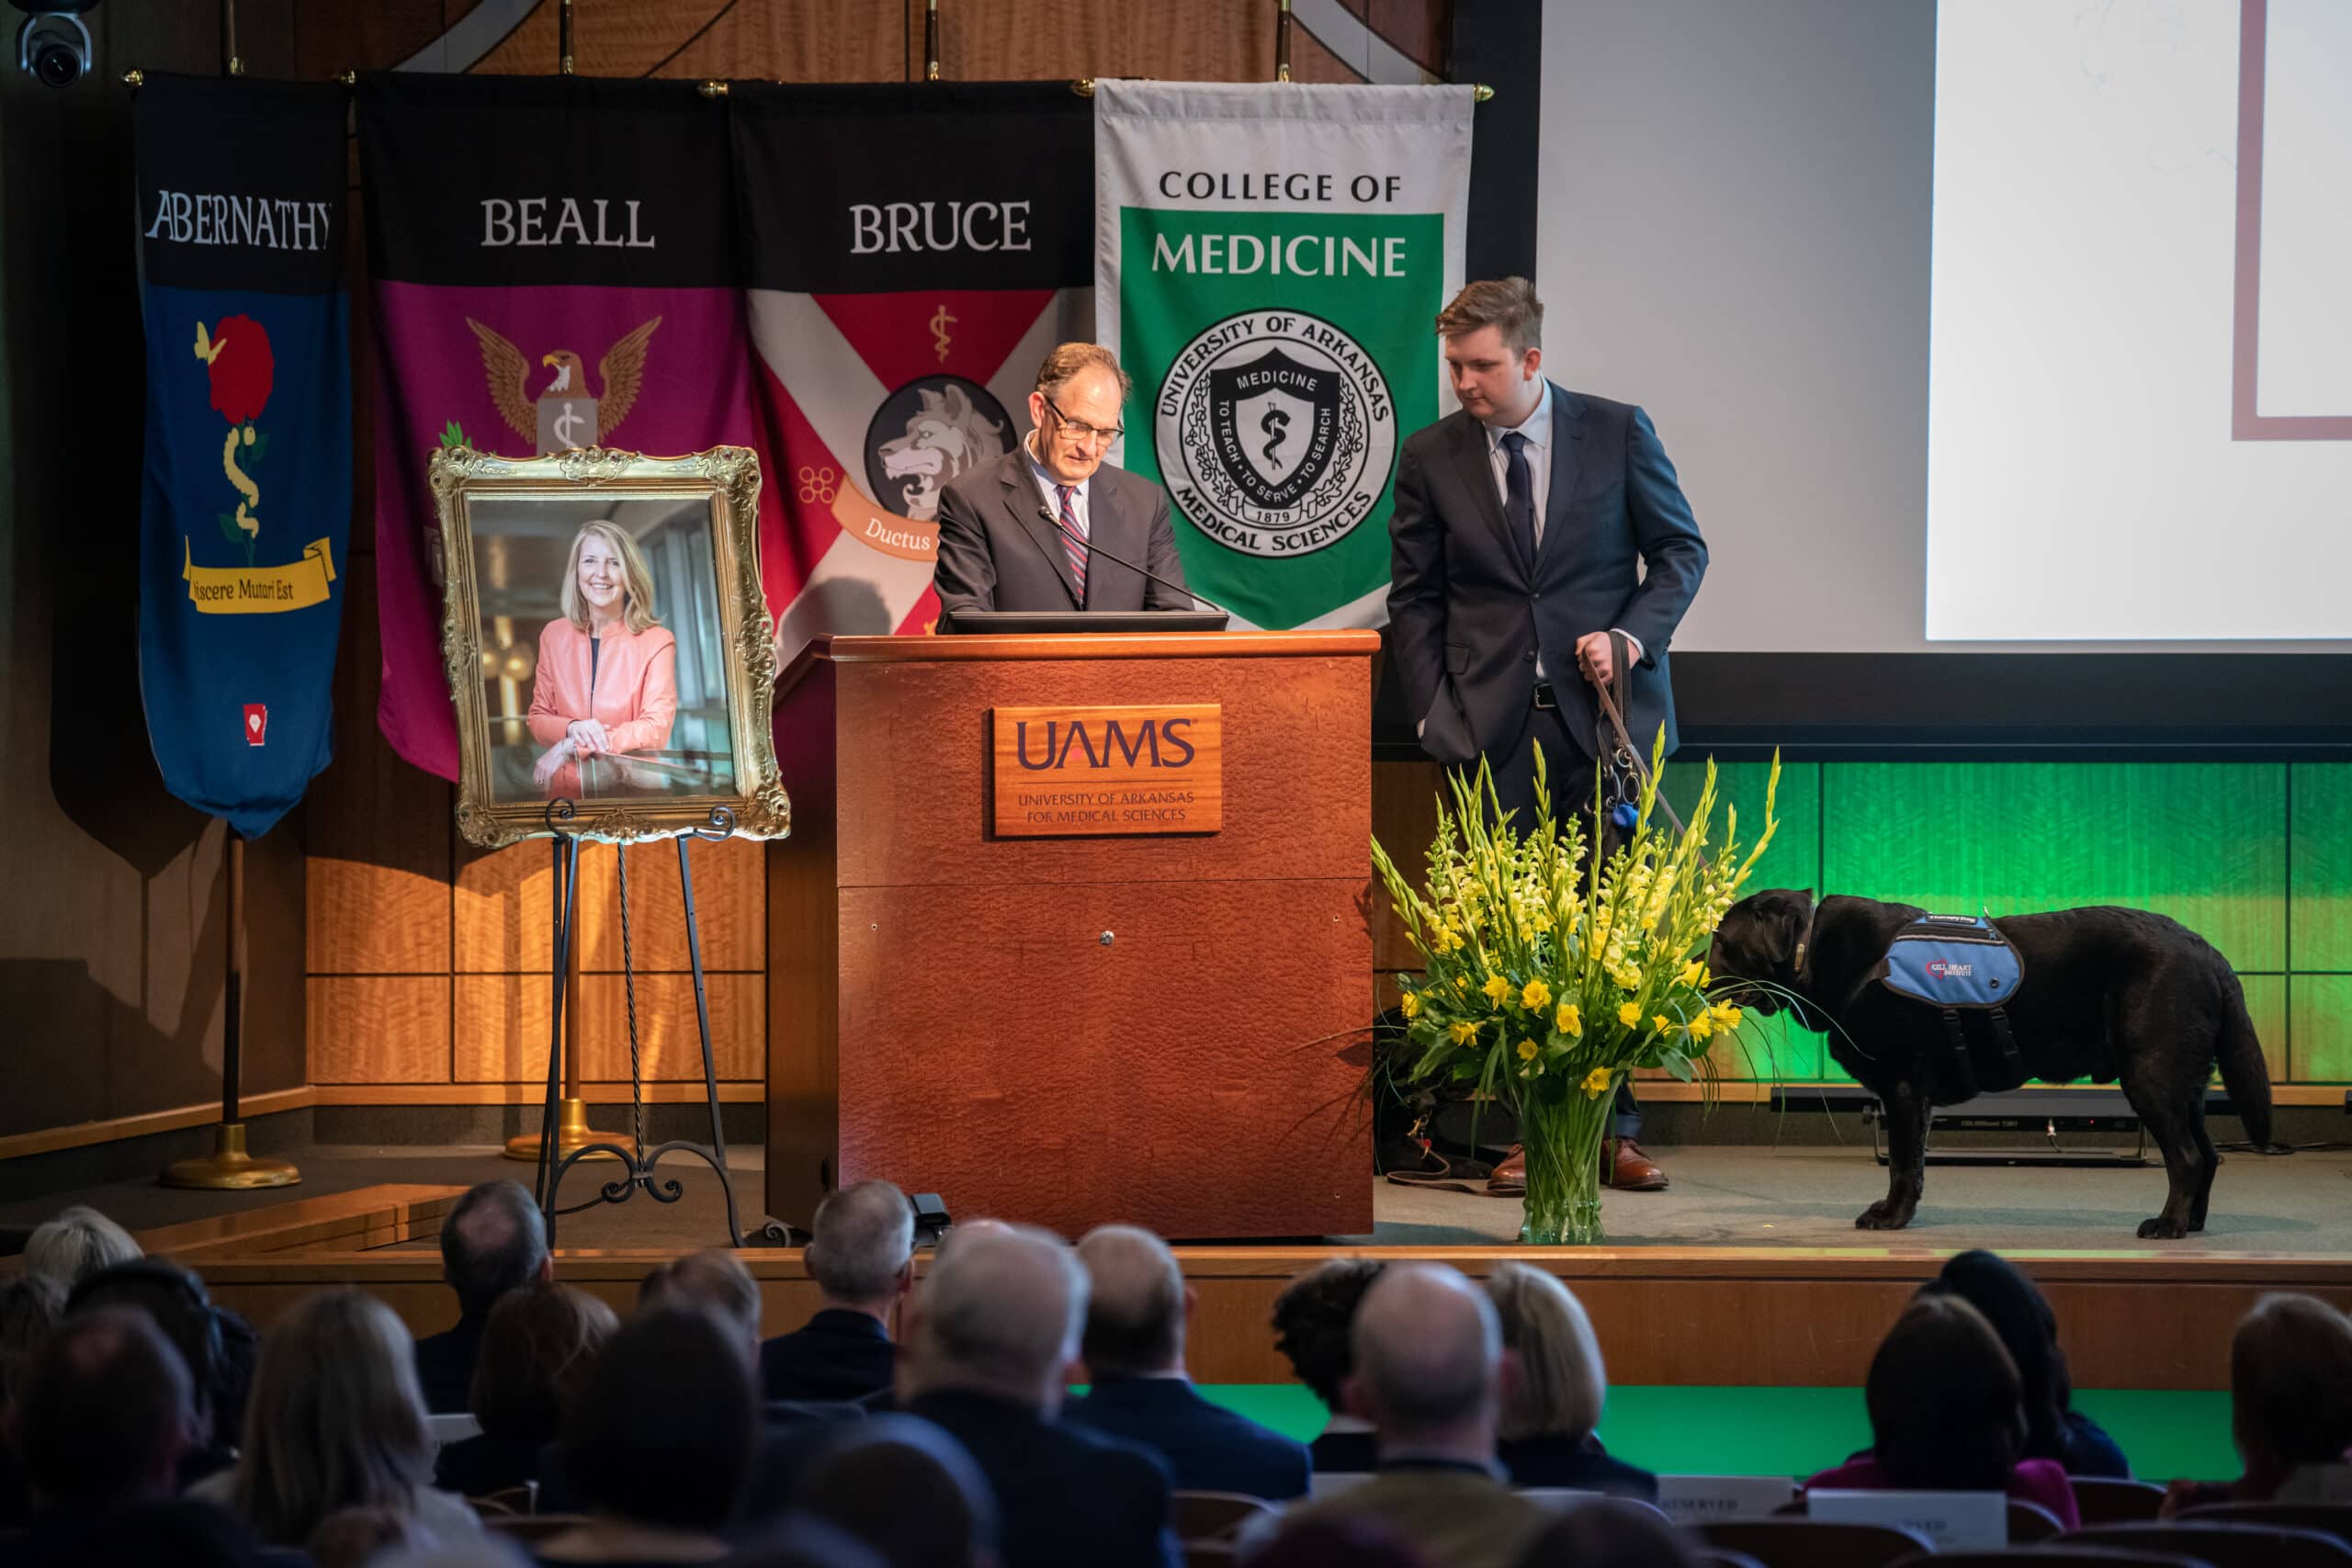 Andrew Morris, Ph.D., addresses the crowd, flanked by his late wife's portrait and son Edward, as well as the family dogs Saleh and Carmine.